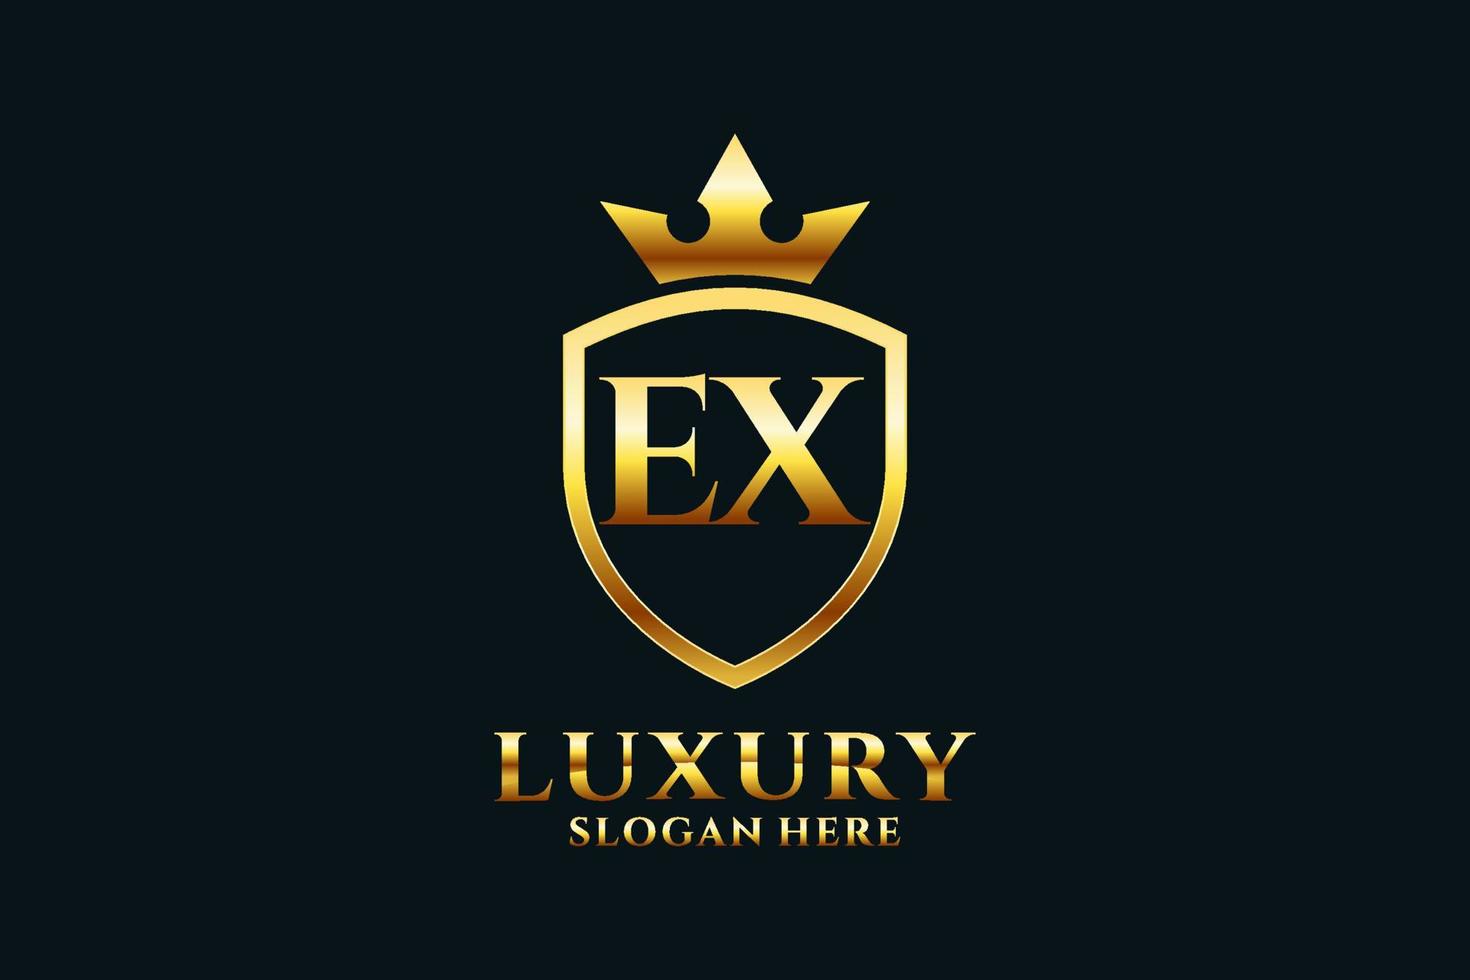 initial EX elegant luxury monogram logo or badge template with scrolls and royal crown - perfect for luxurious branding projects vector